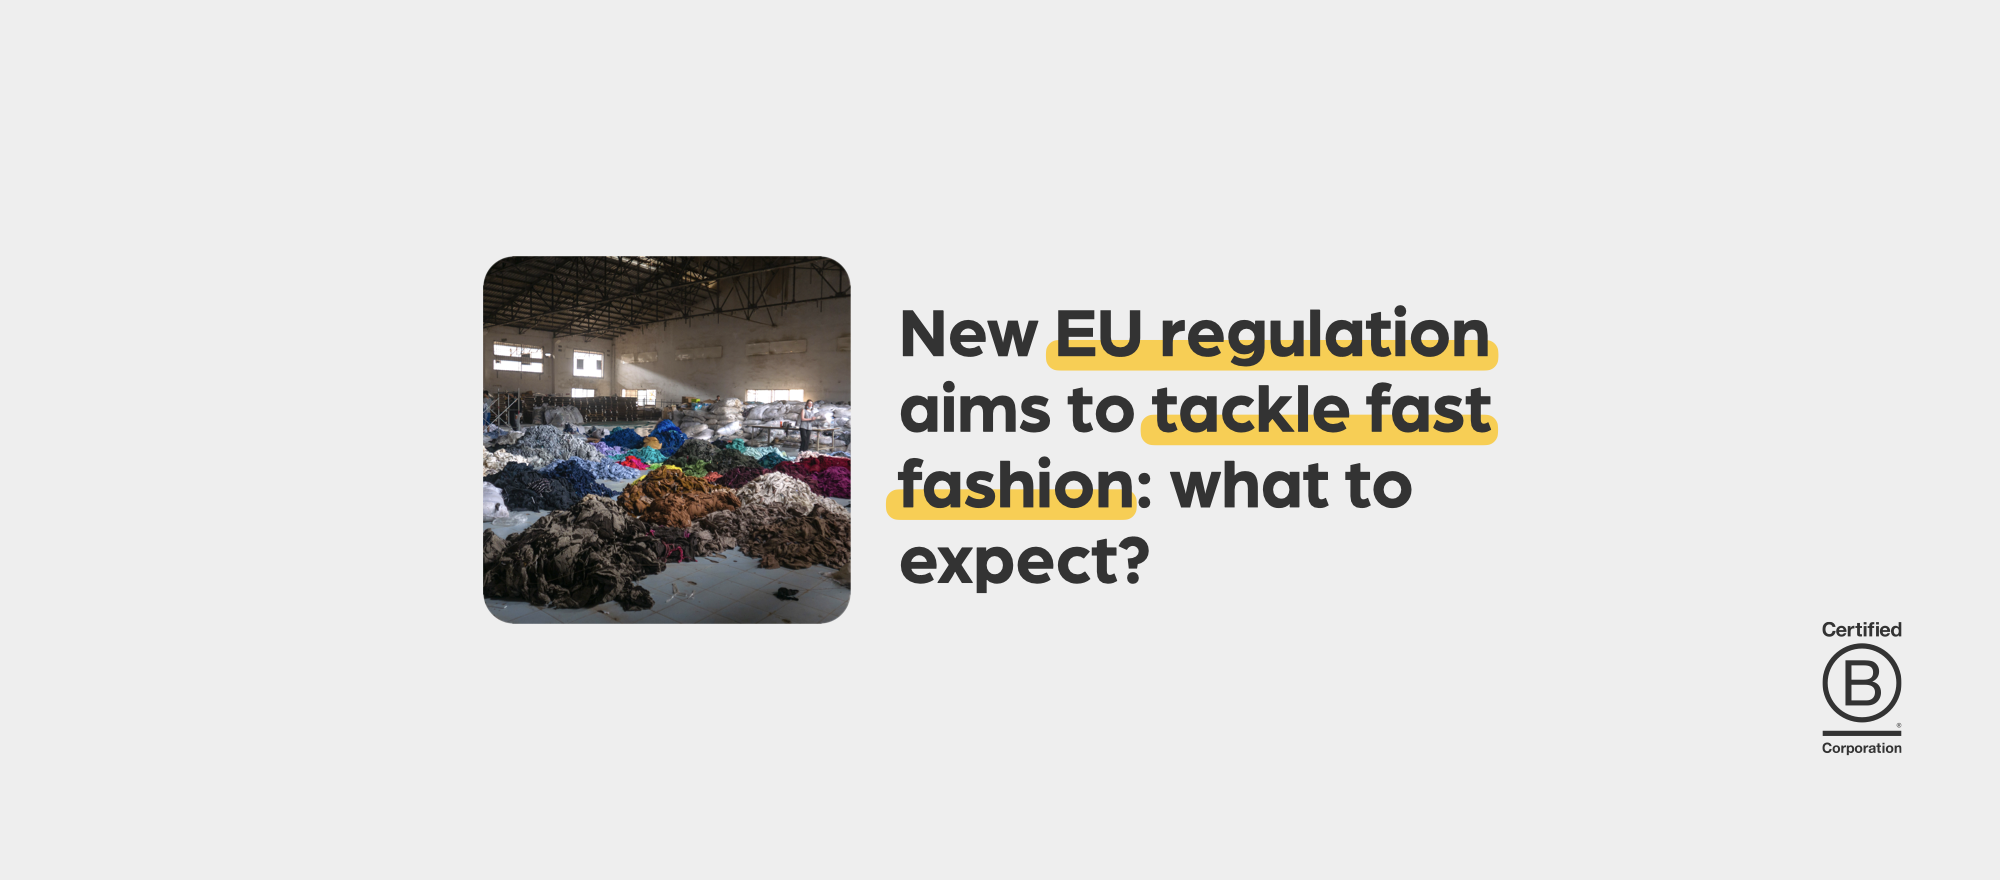 New EU regulation aims to tackle fast fashion: what to expect?